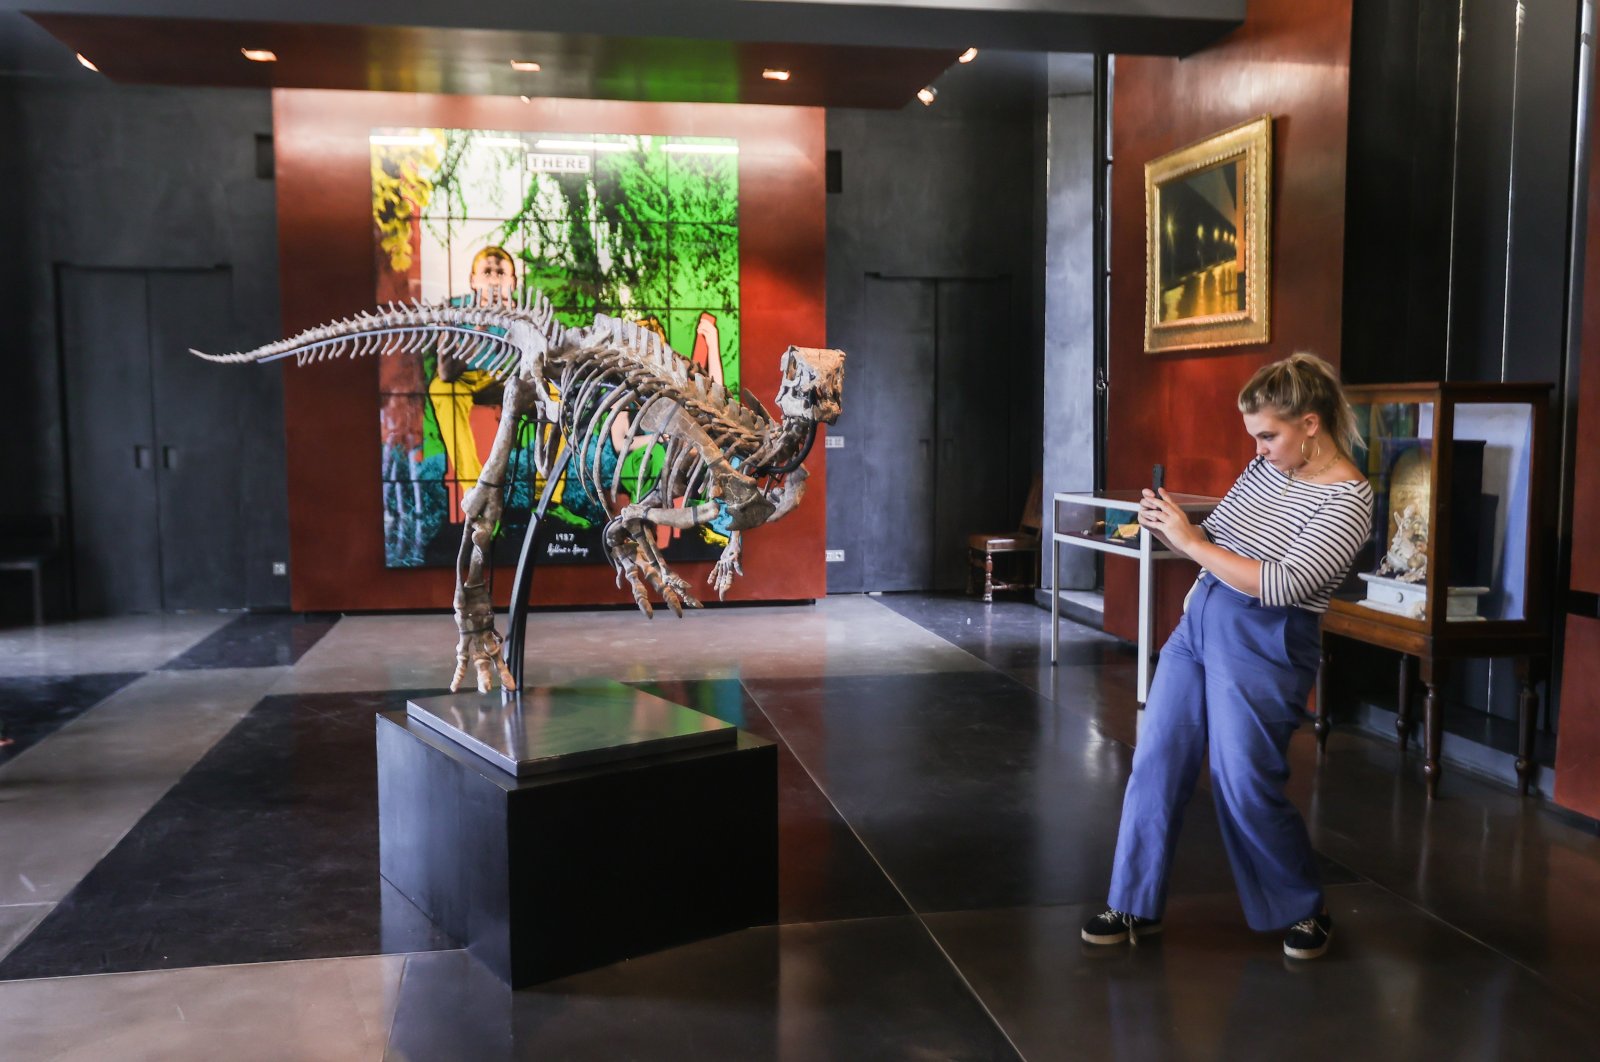 A journalist takes a picture of the full skeleton of an Iguanodon dinosaur on display at the Alexandre Giquello auction house during a press presentation in Paris, France, Sept. 7, 2022. (EPA Photo)